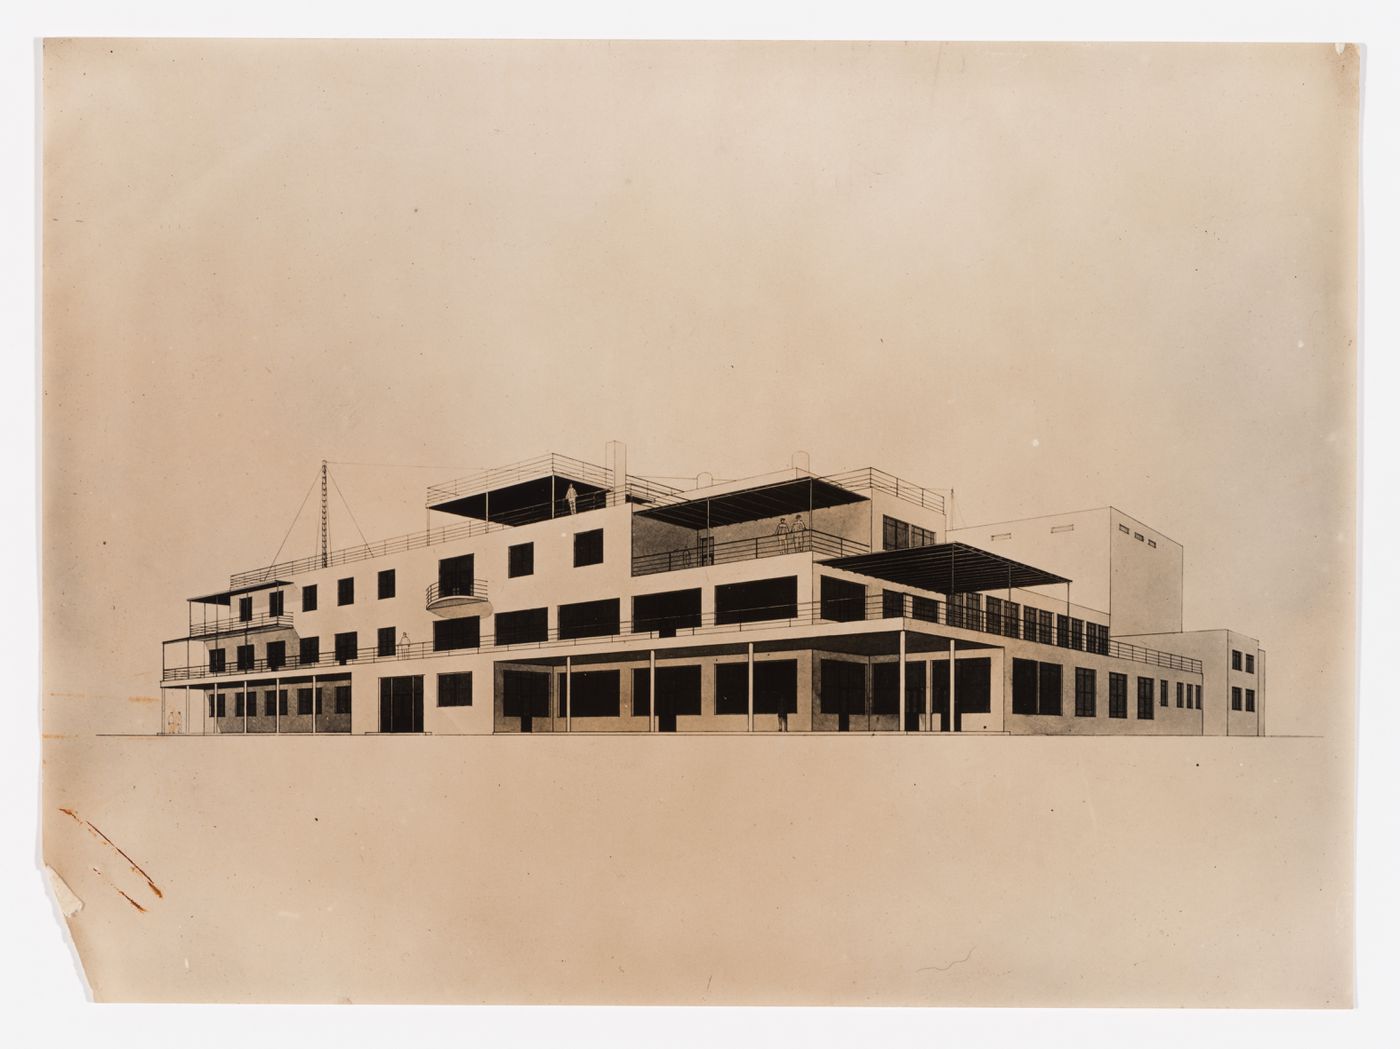 View of an elevation drawing for a club by the Wesnine brothers, U.S.S.R. (now Russia)